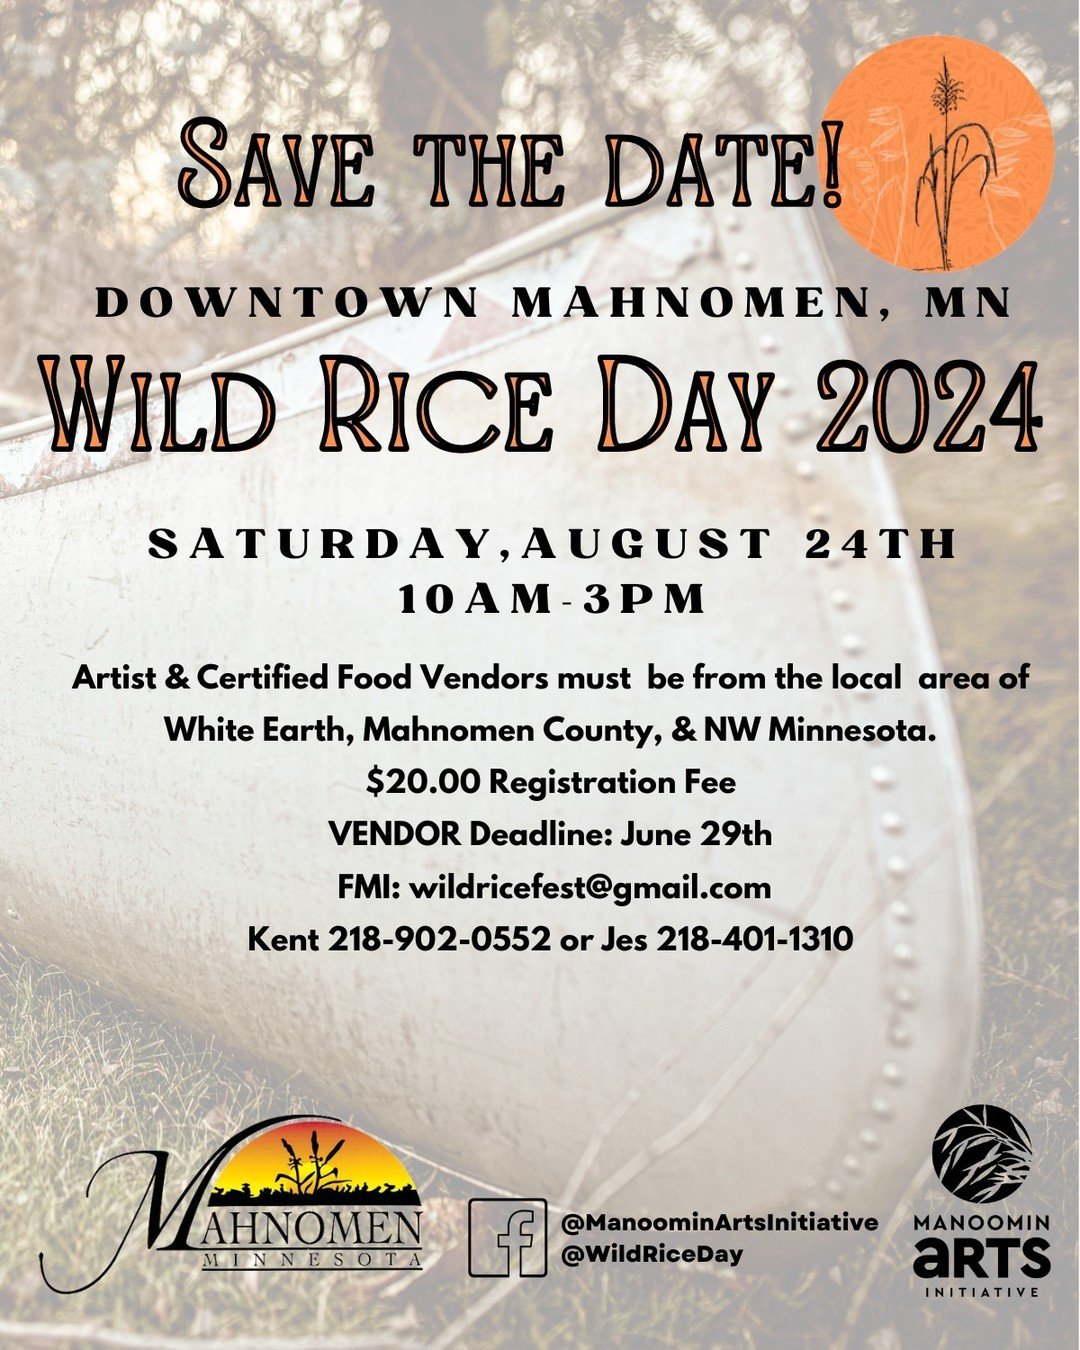 Save the Date!
Wild Rice Day is August 24th, 10am-3PM

Artist &amp; Certified Food Vendors must be from the local area of White Earth, Mahnomen County, &amp; NW Minnesota.

Vendors apply by June 29th, there is a $20 registration fee.  The link can be